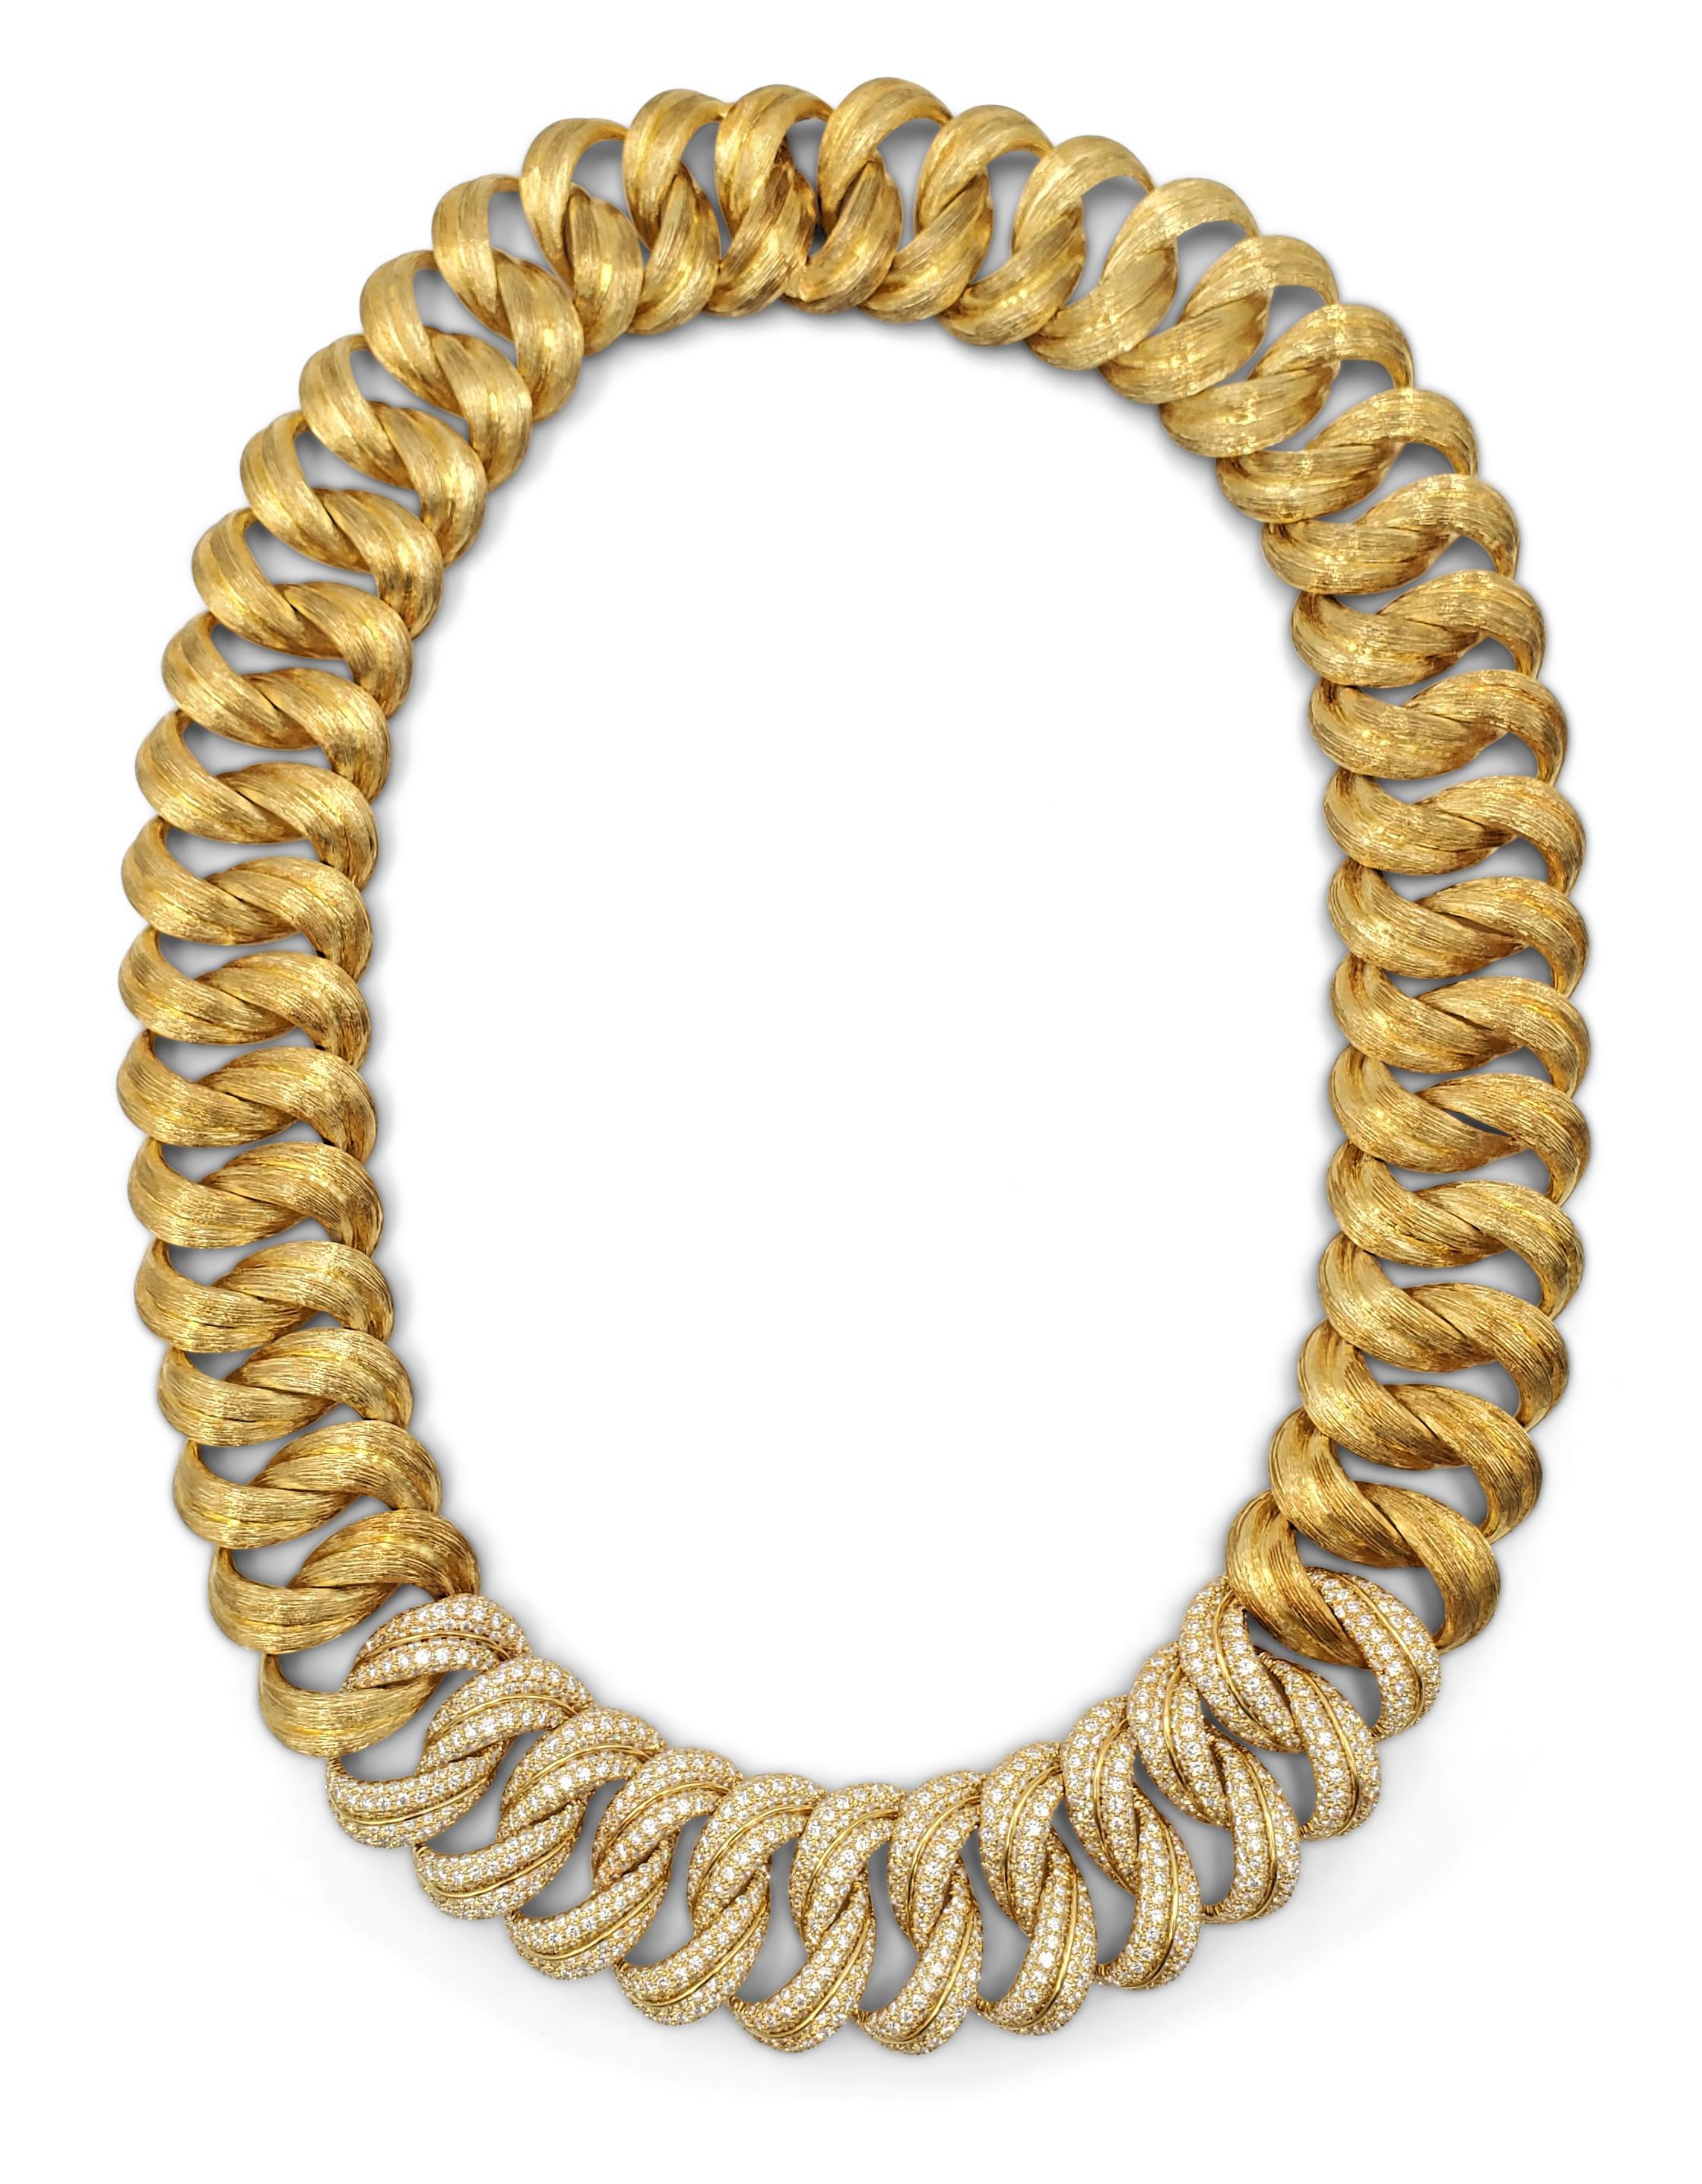 Stylish Henry Dunay 'Sabi' brushed gold finish link necklace features approximately 20 carats of high quality pave set round brilliant cut diamonds (E-F color, VS clarity). Signed Dunay with maker's mark for Henry Dunay, 750, A5629. Measures 19 1/2